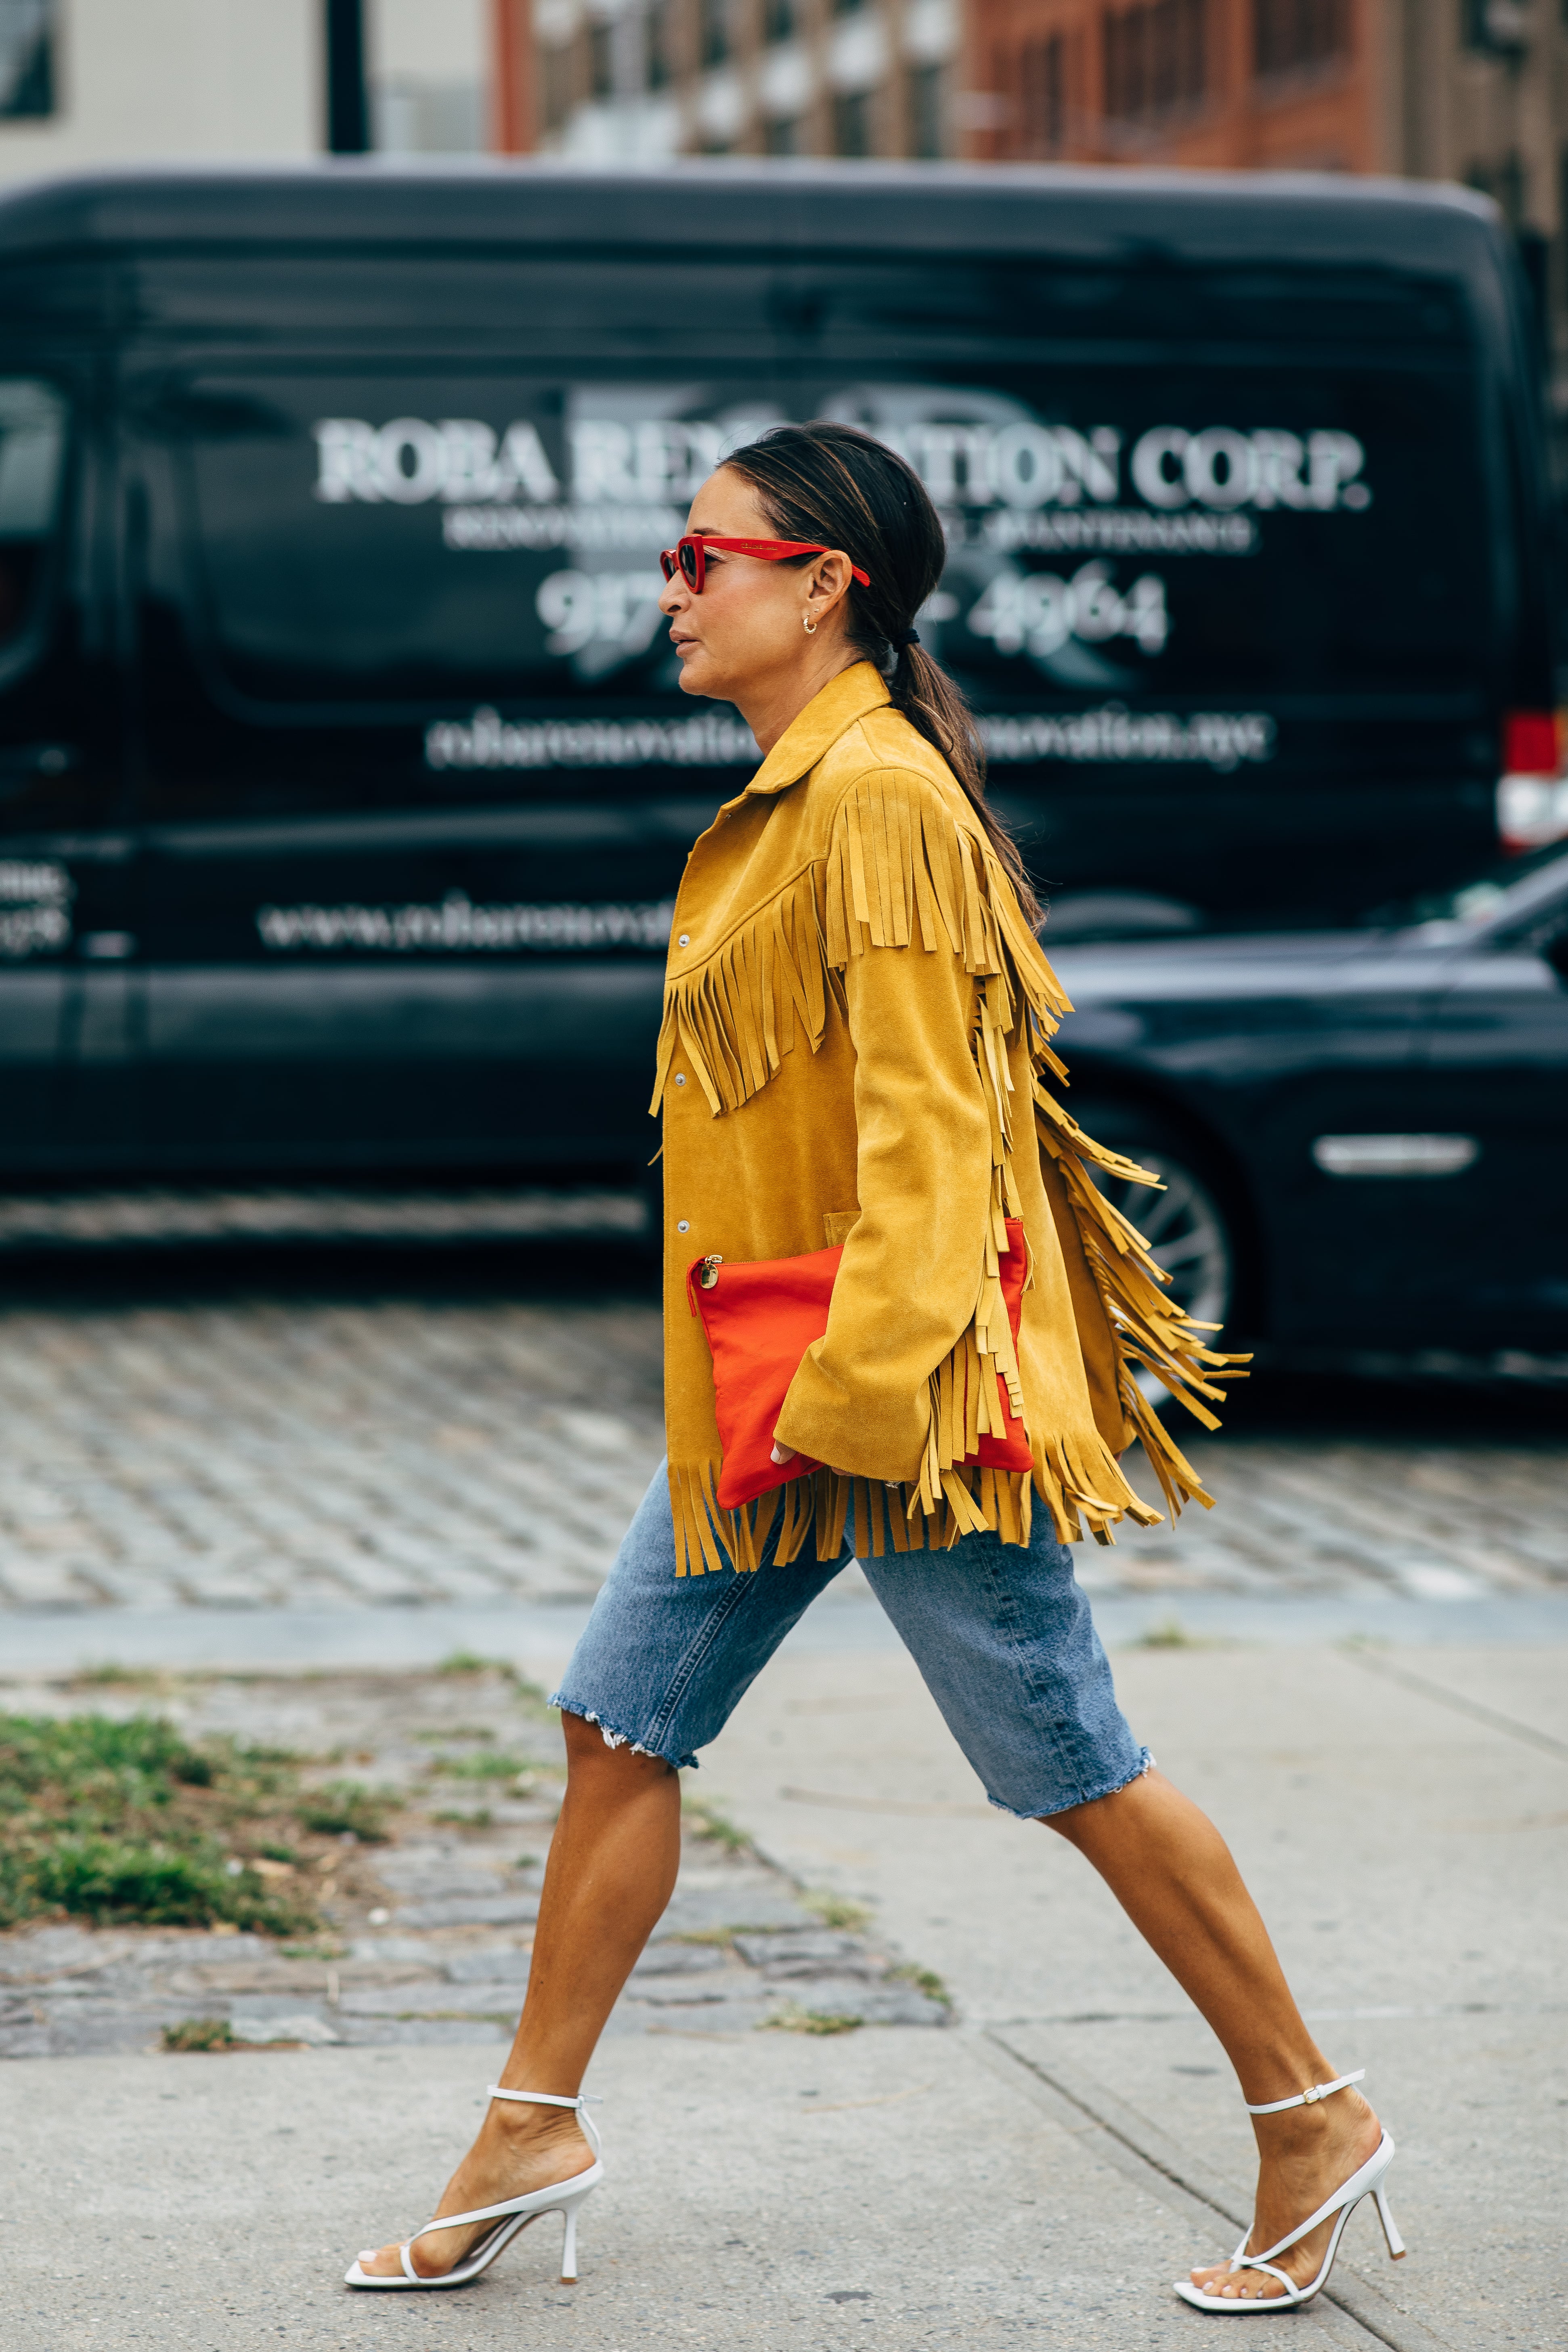 Suede - Street Style, Look of the Day